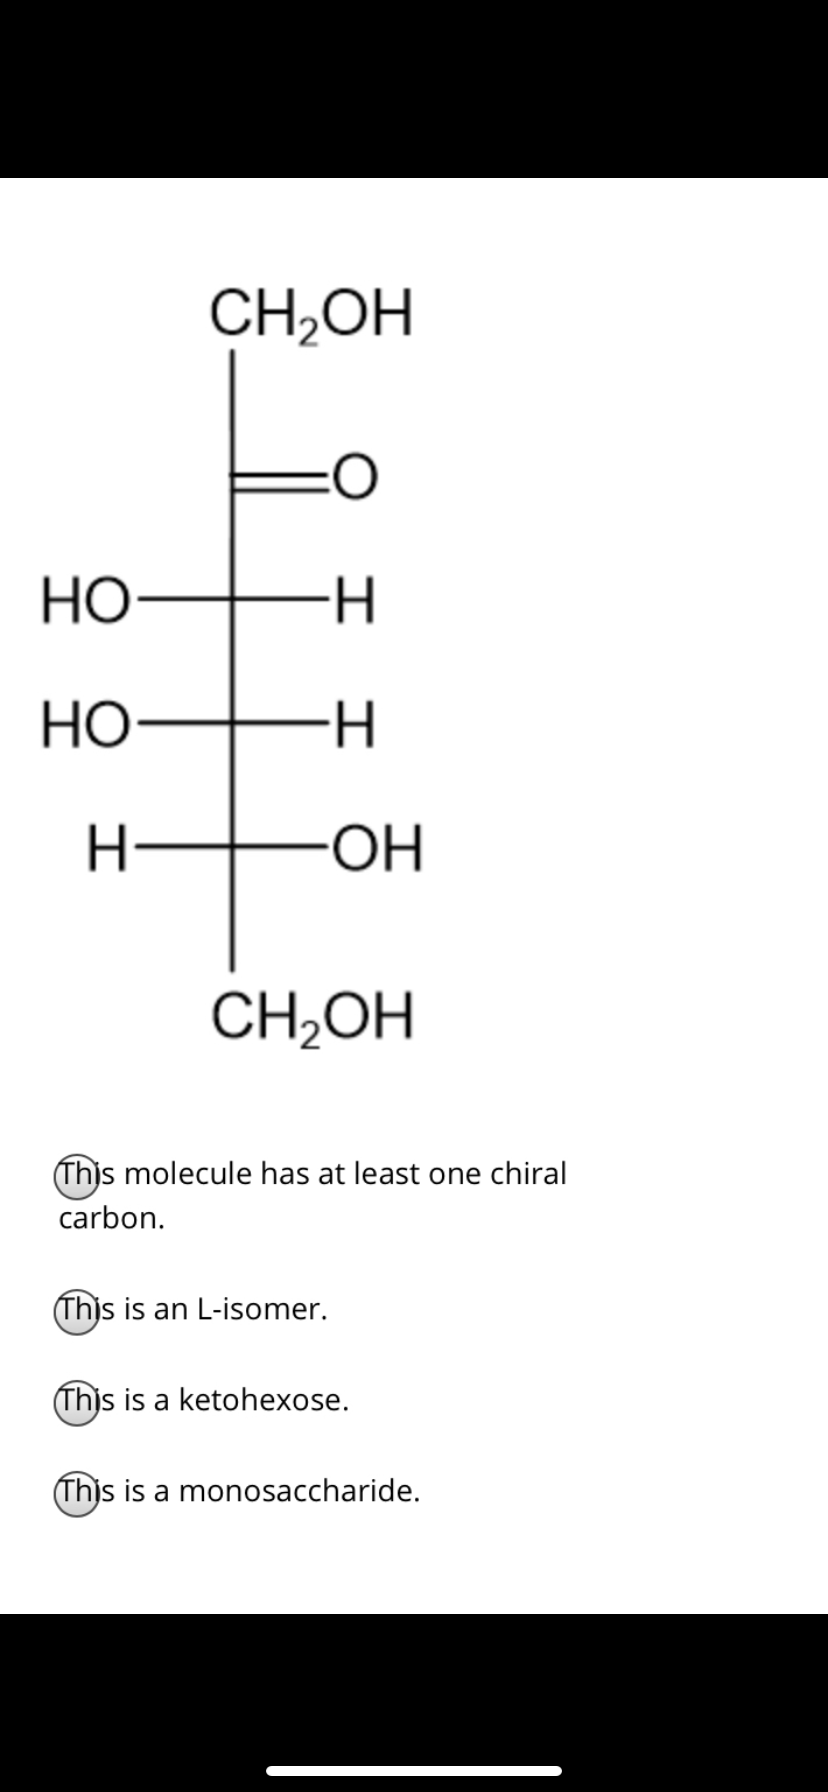 CH,OH
Но-
-H-
Но-
H-
ОН
CH;OH
(Thjs molecule has at least one chiral
carbon.
(This is an L-isomer.
Thjs is a ketohexose.
(Thjs is a monosaccharide.
